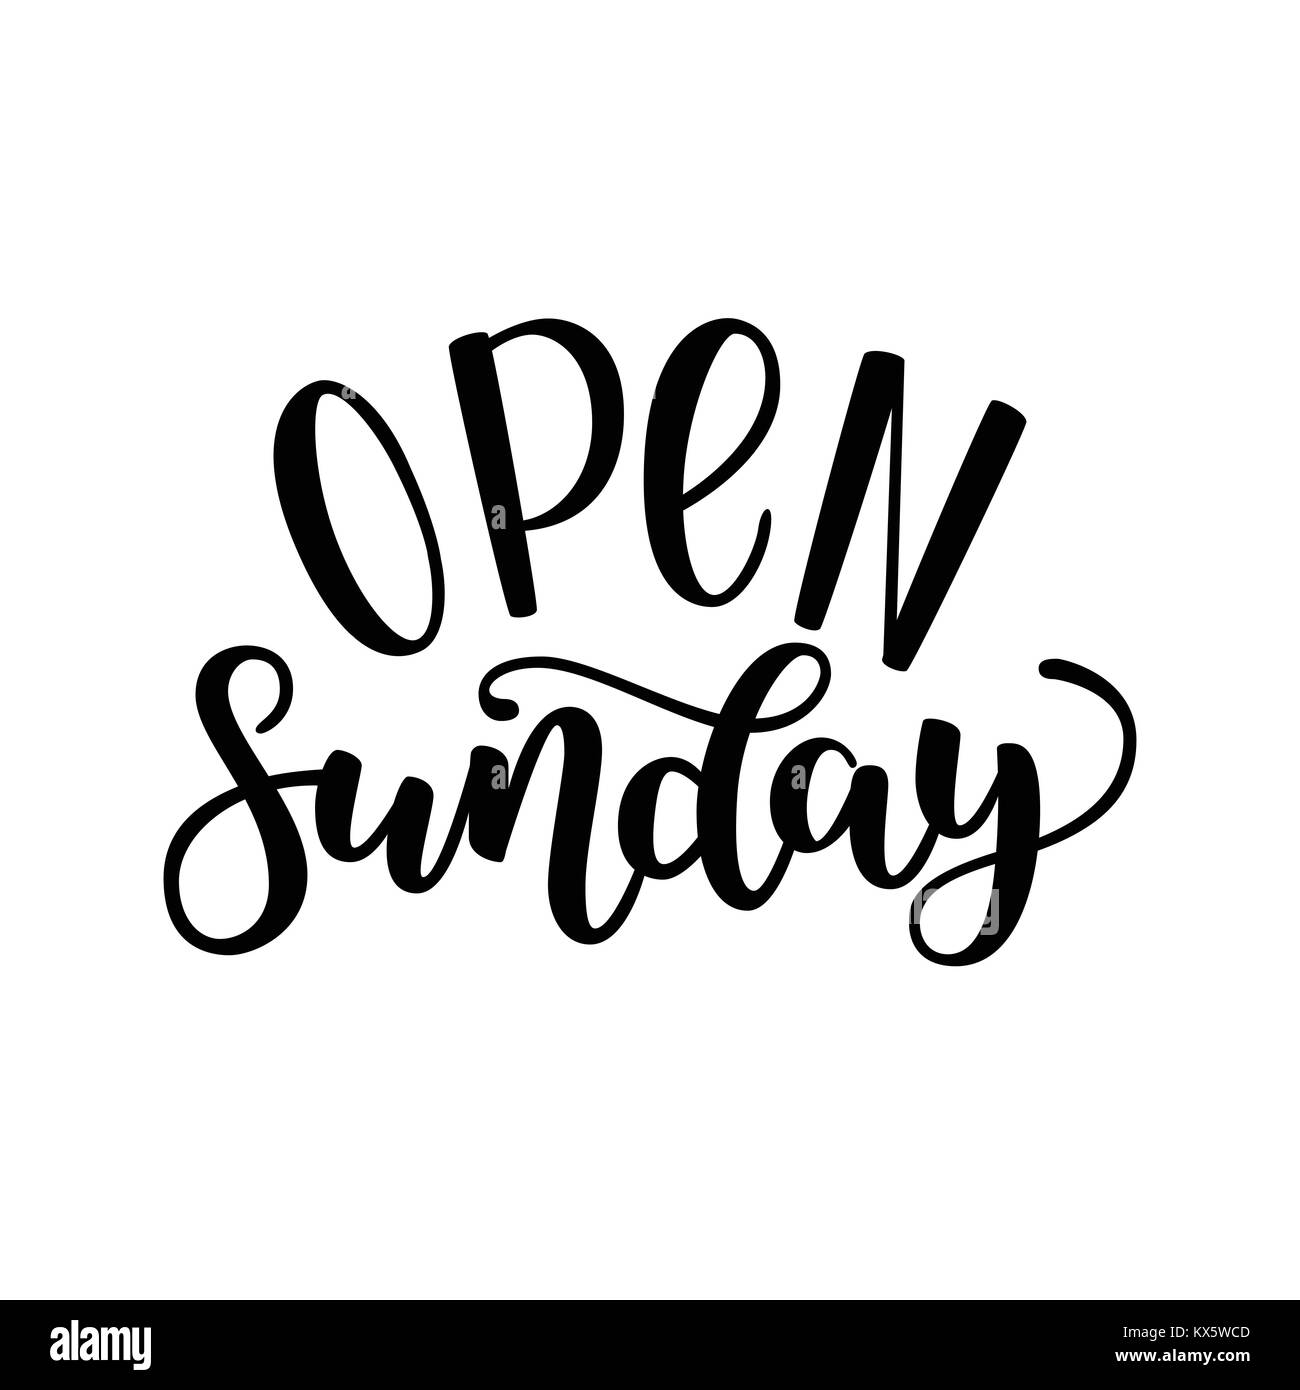 Open sunday handlettering isolated on white background, vector illustration. Brush ink lettering. Modern calligraphy for public places, shops and othe Stock Vector